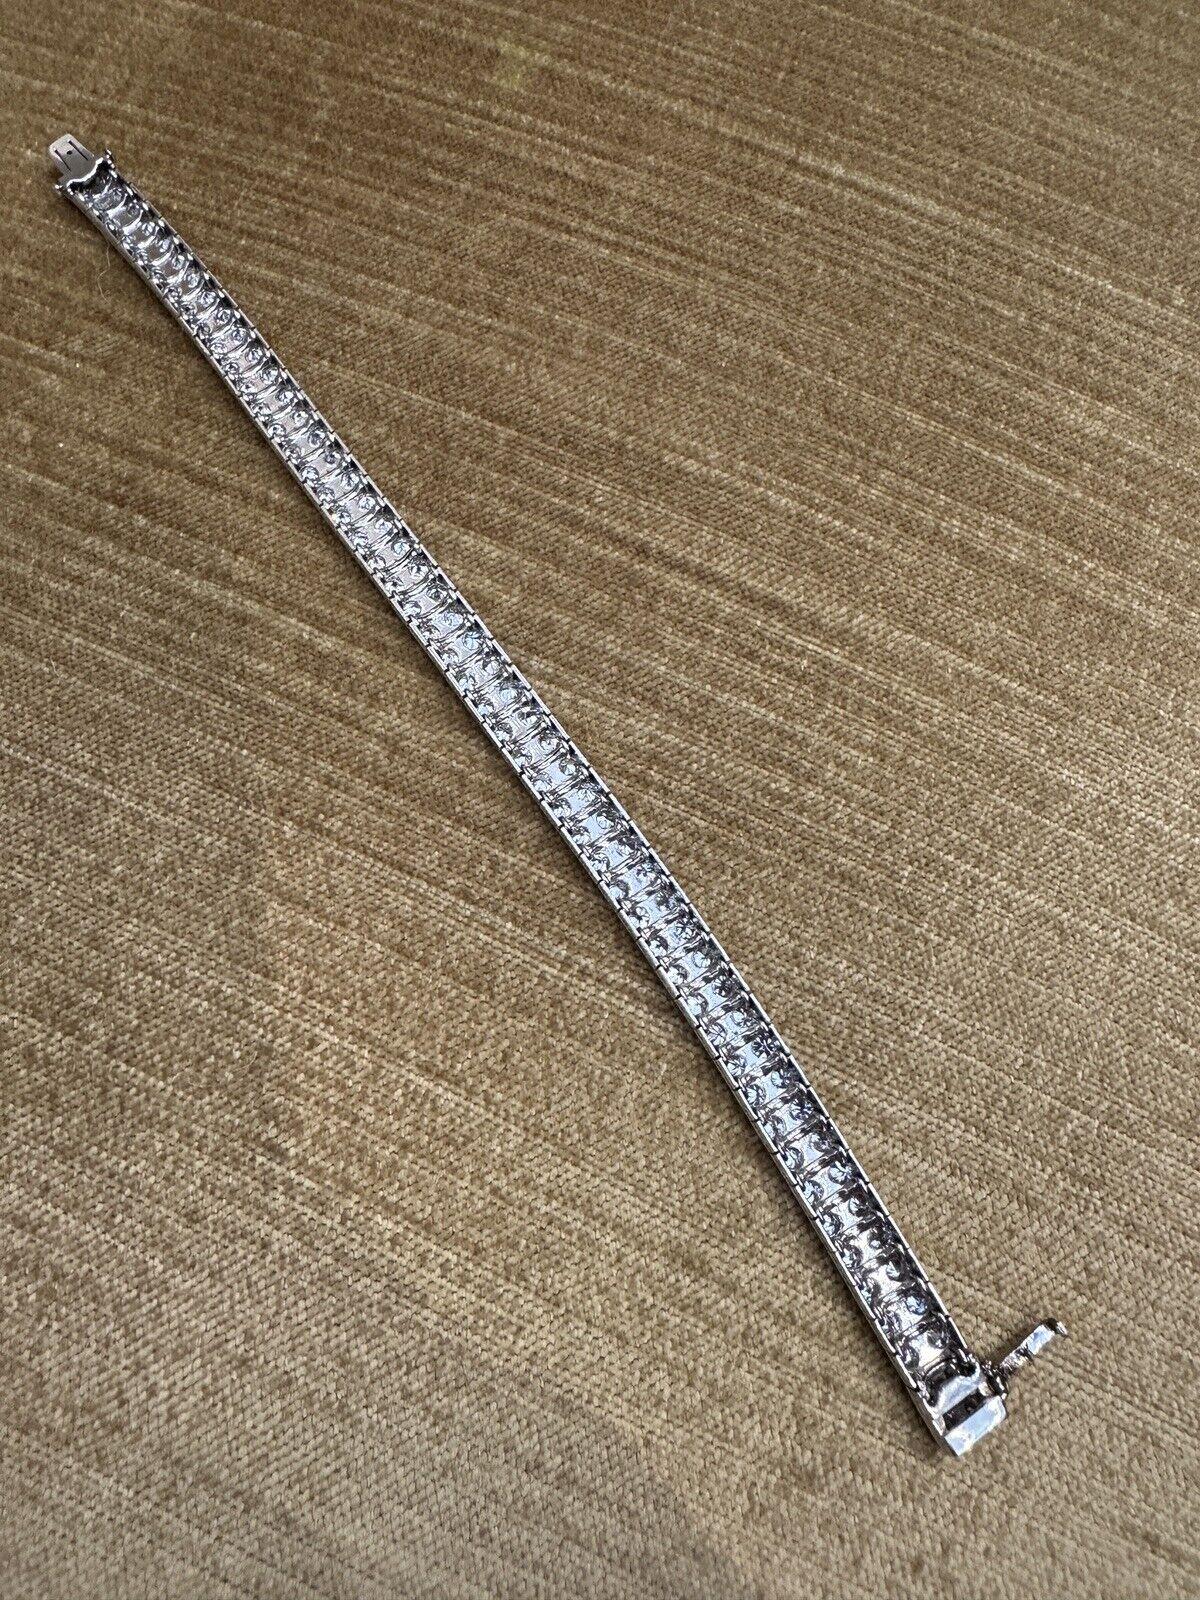 Women's 7 carats Old Euro Cuts Two row Diamond Tennis Bracelet in Platinum For Sale